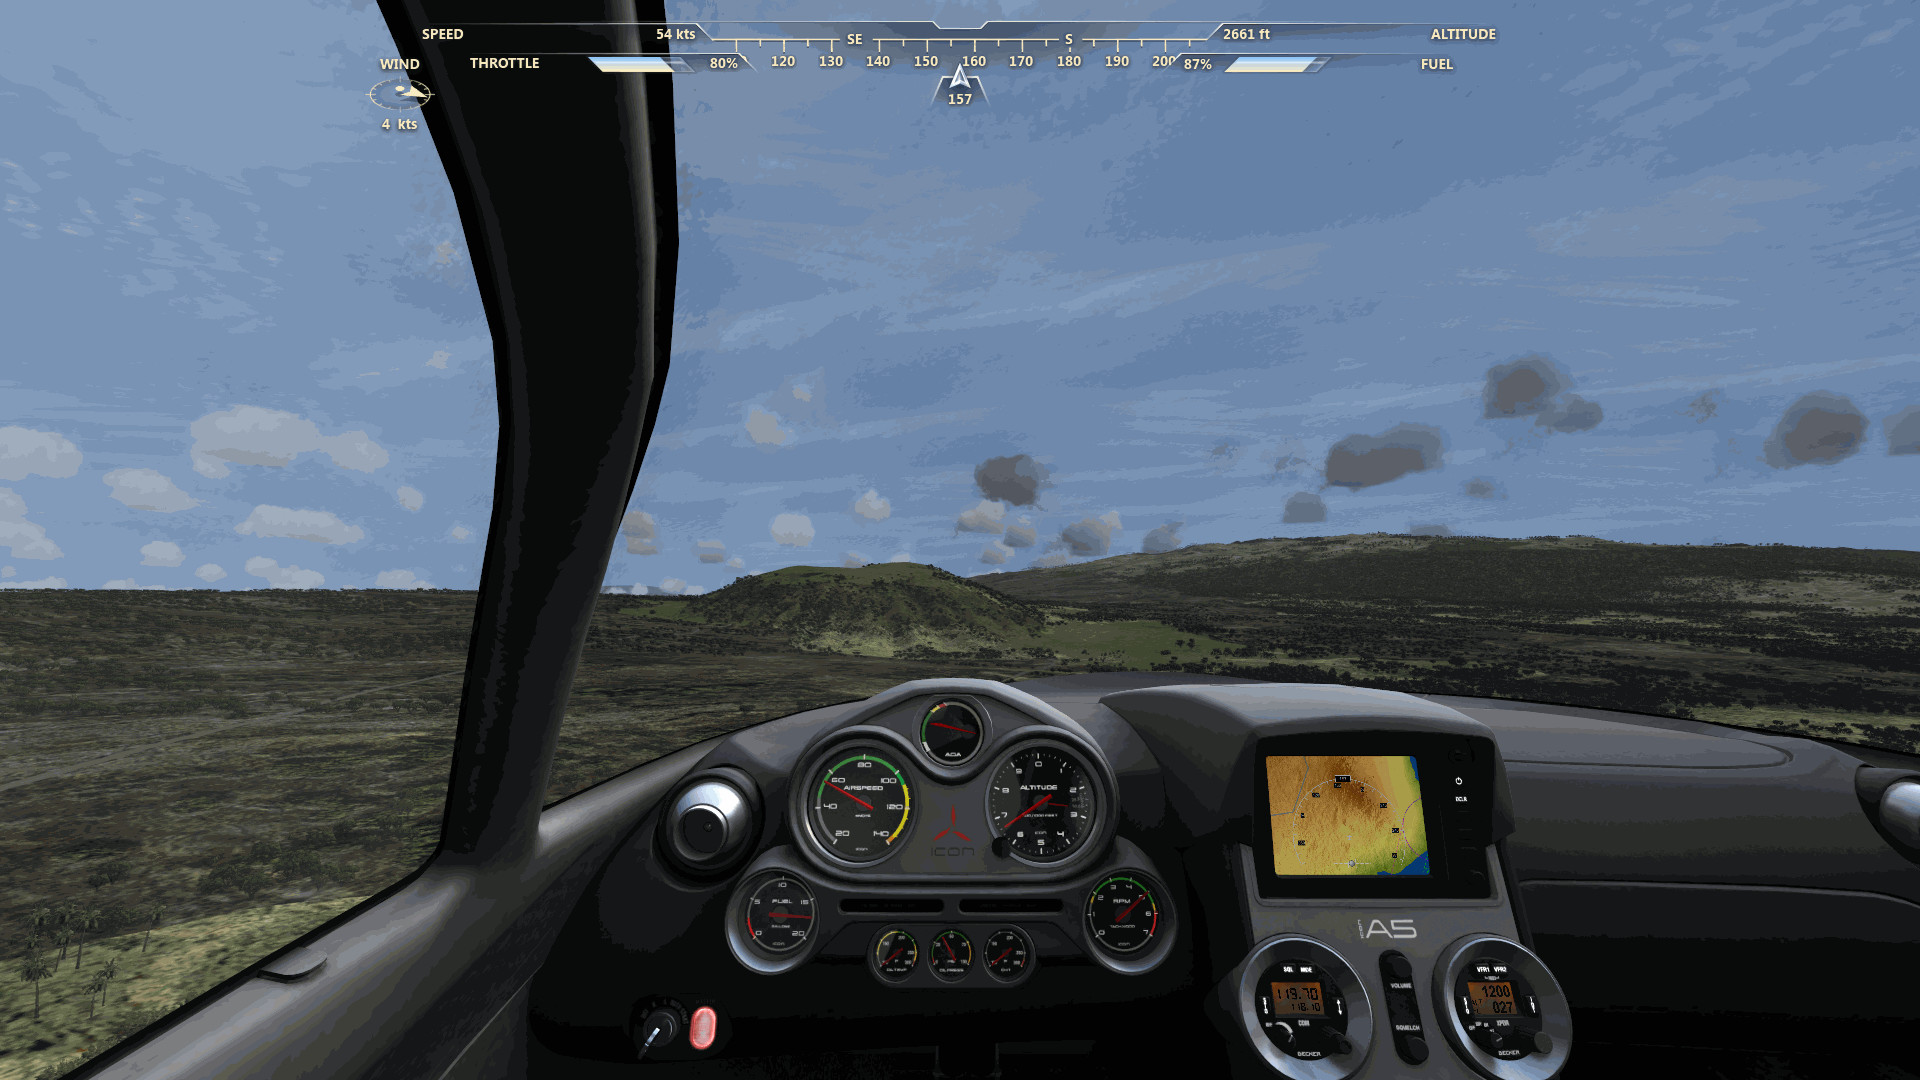 1920x1080 Flight Simulator is dead, but Microsoft's revered game will be revived  under a new name